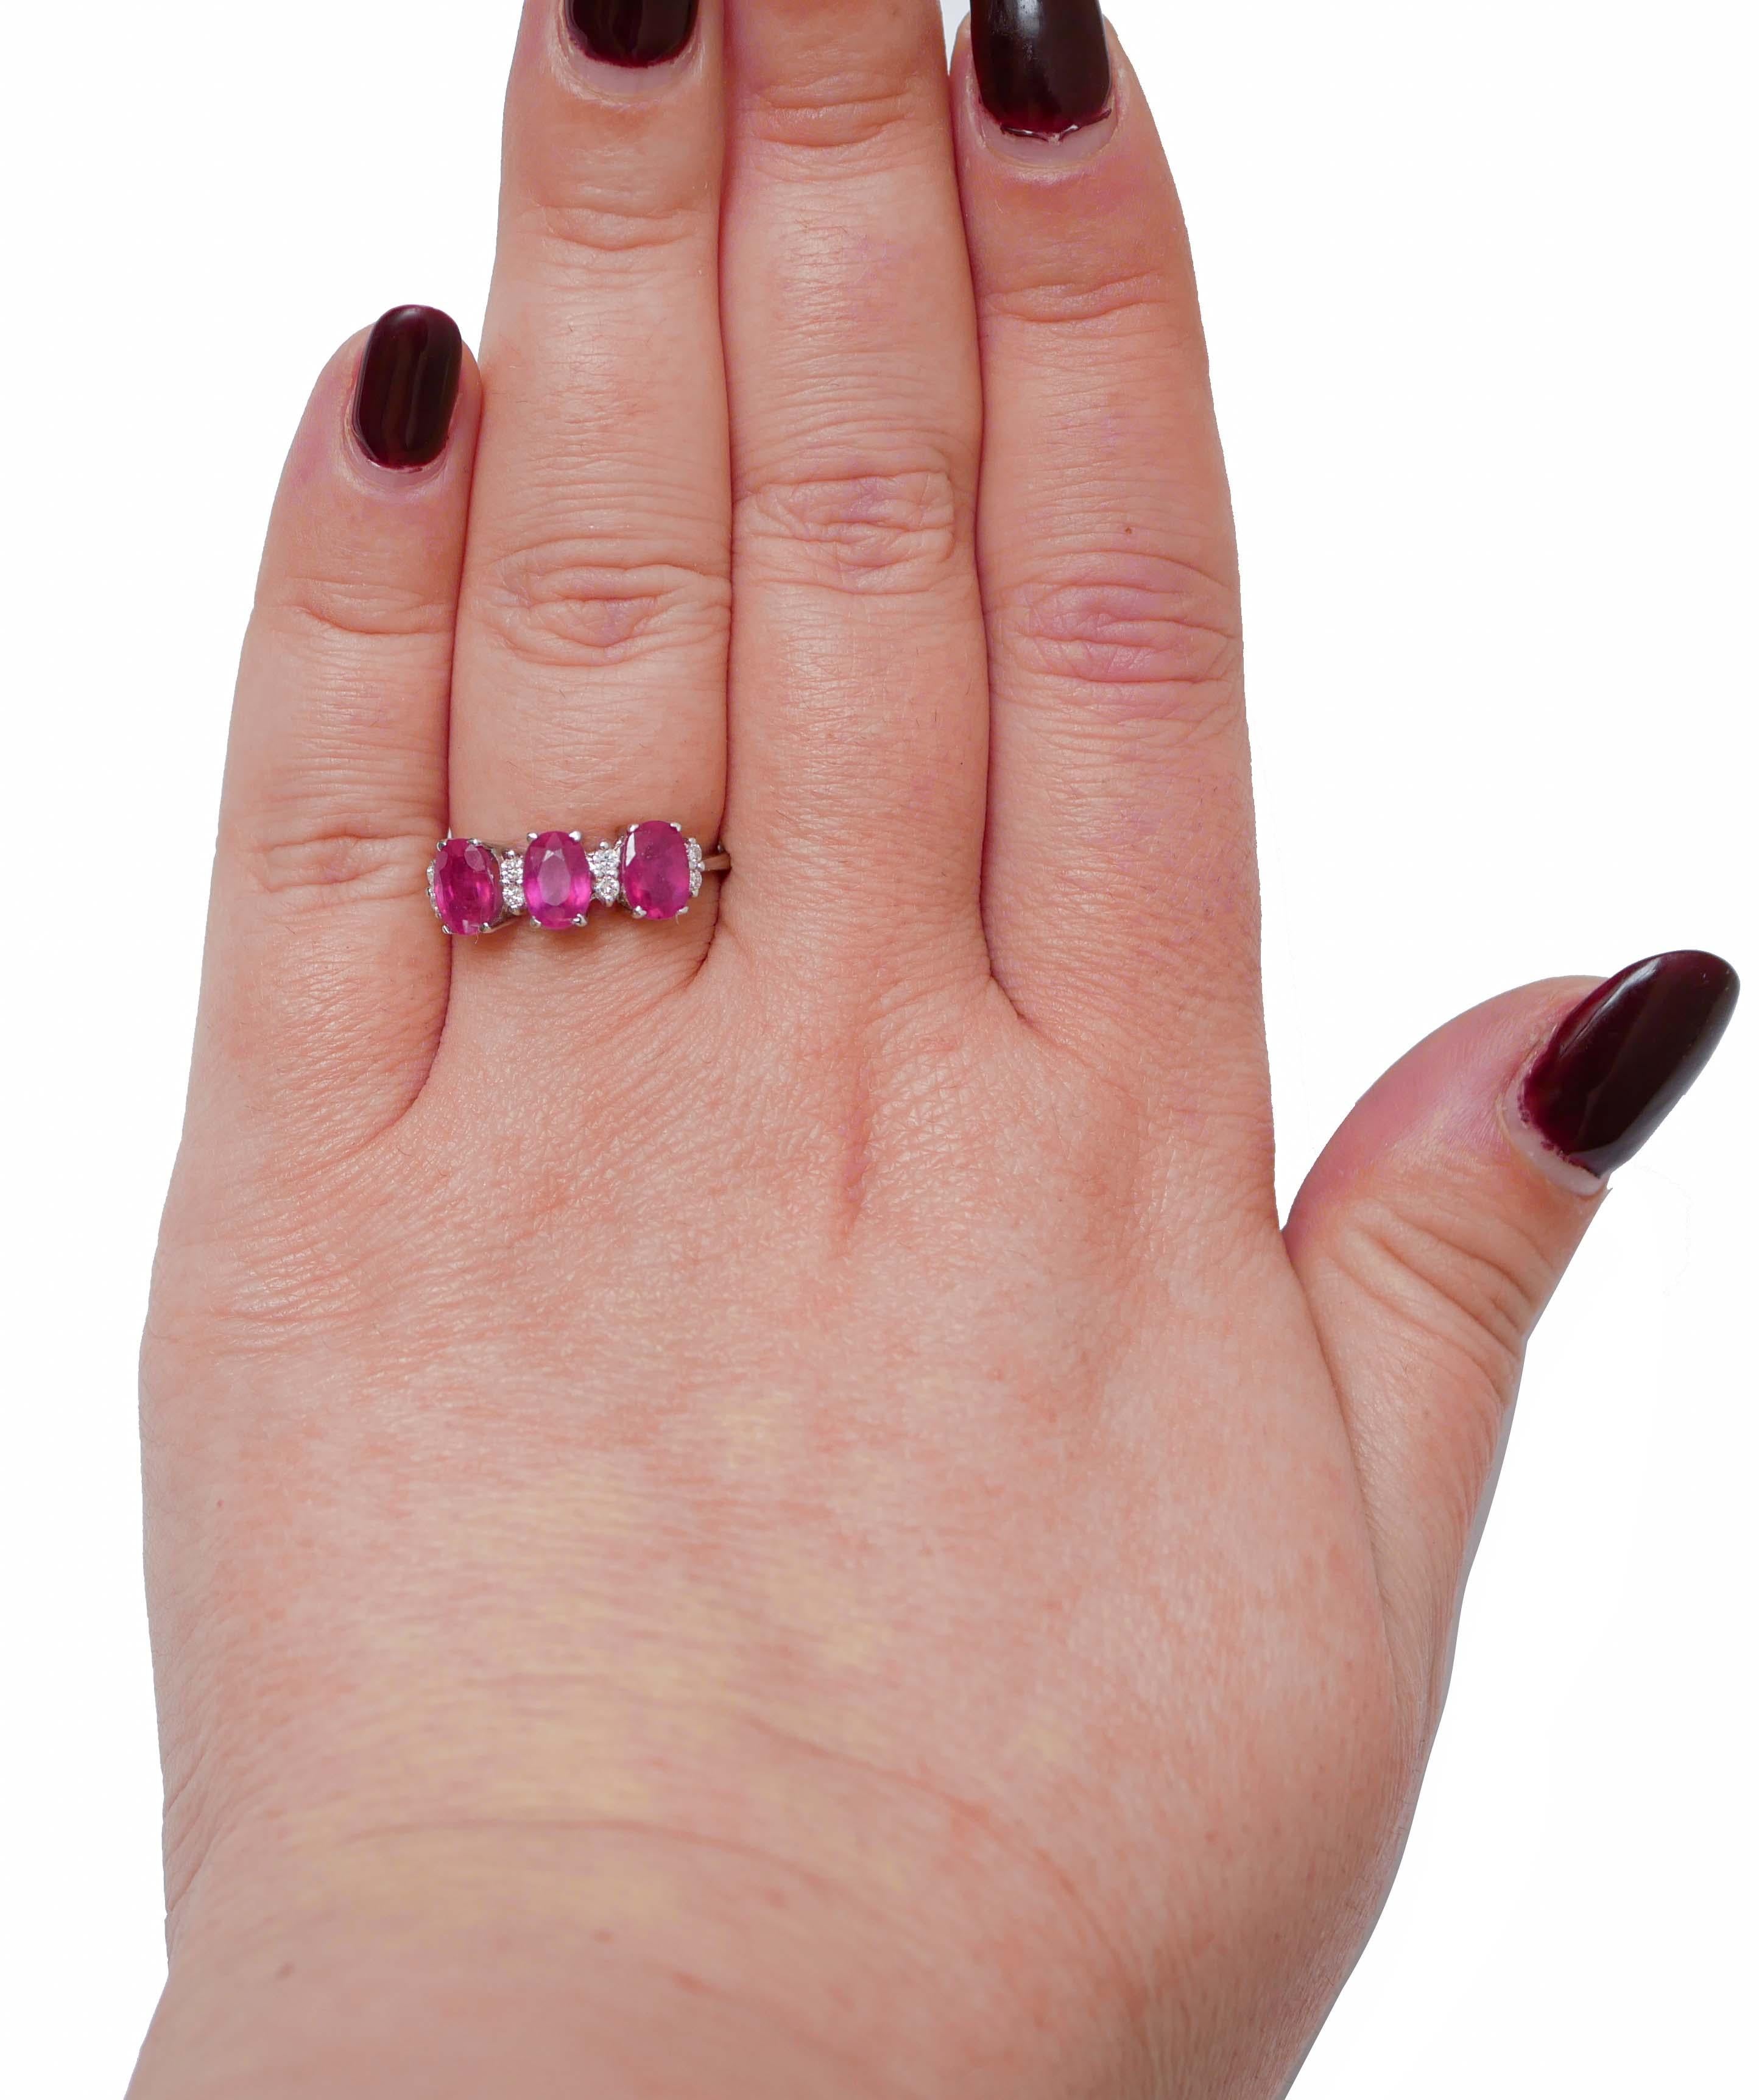 Rubies, Diamonds, 18 Karat White Gold Modern Ring. In New Condition For Sale In Marcianise, Marcianise (CE)